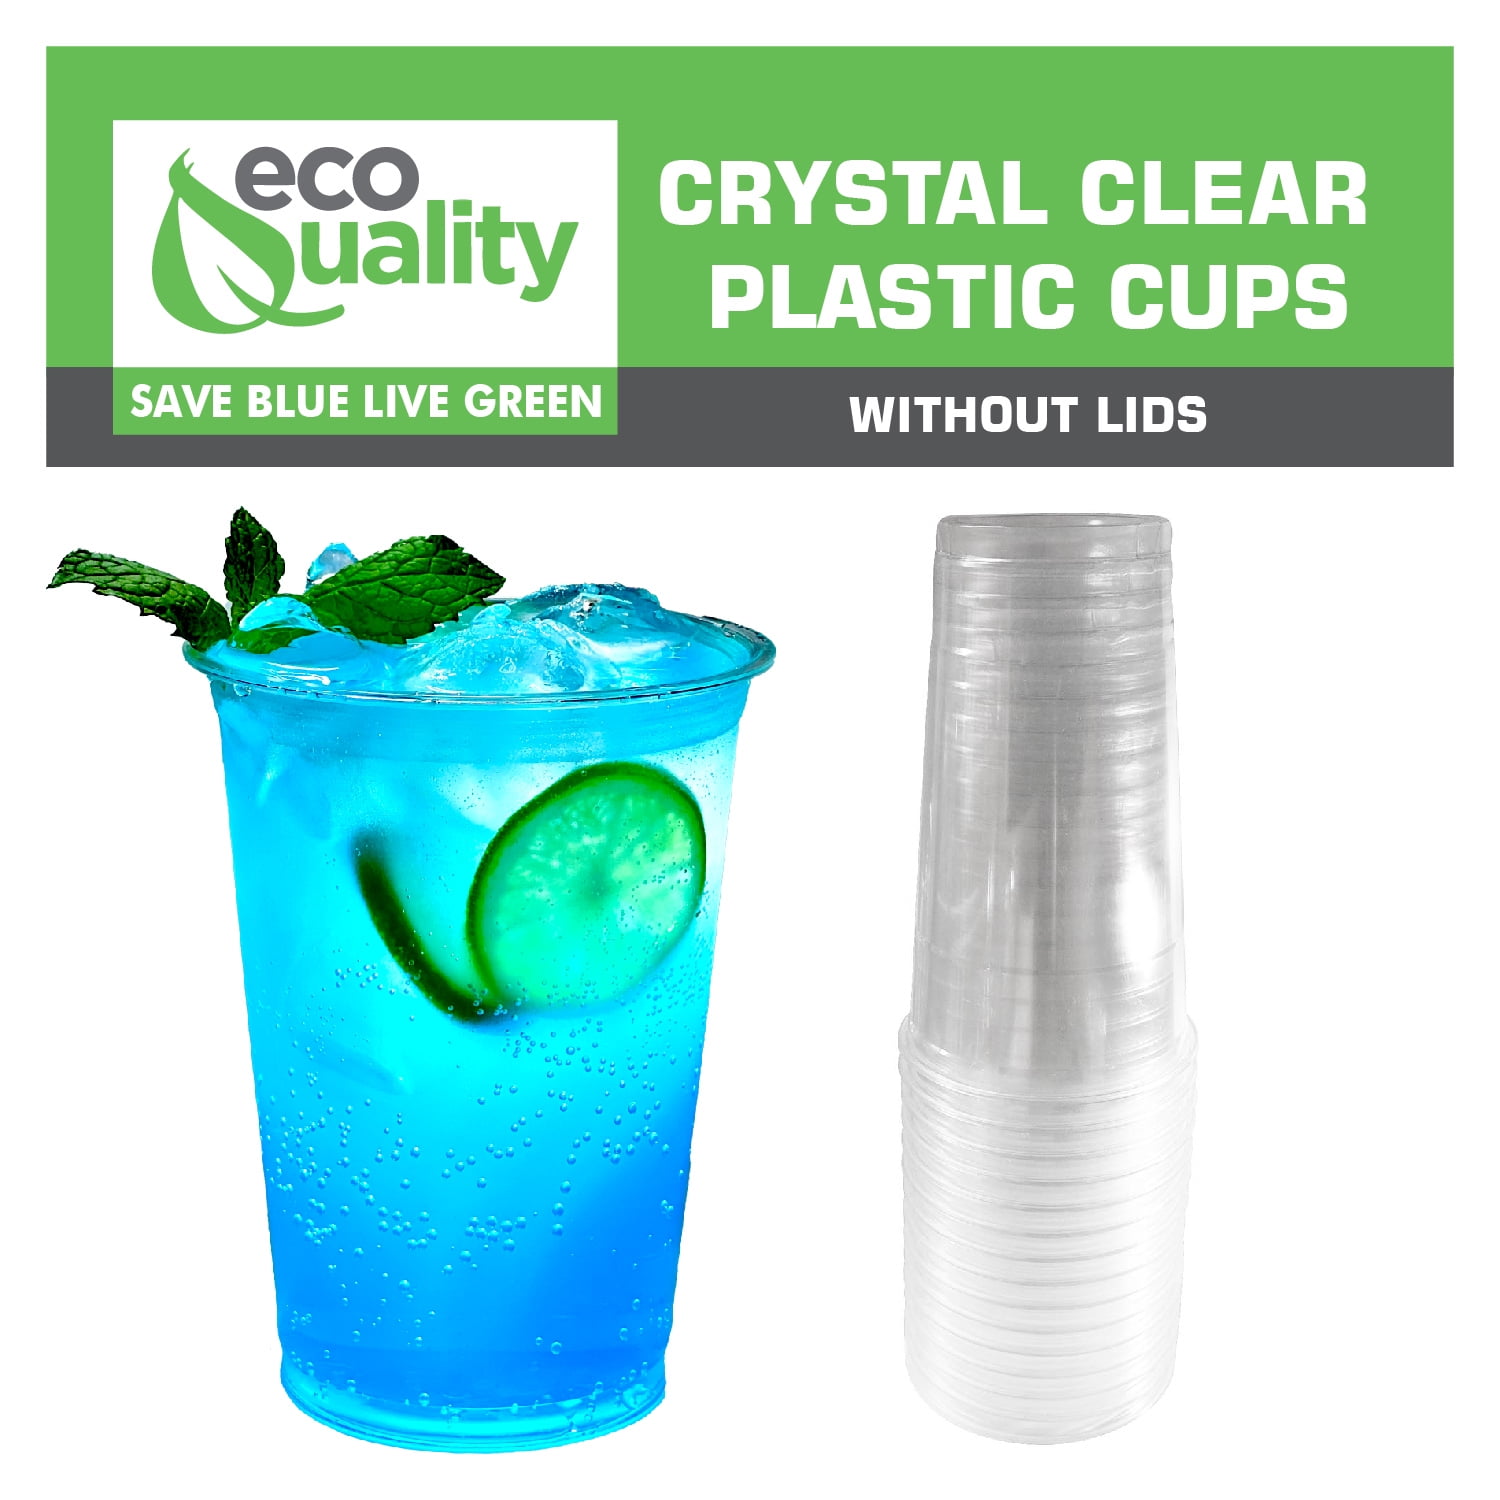 (500 Sets) 16 oz Clear Plastic Cups with Lids and FREE Straws, Disposable  Crystal Clear PET Cups wit…See more (500 Sets) 16 oz Clear Plastic Cups  with